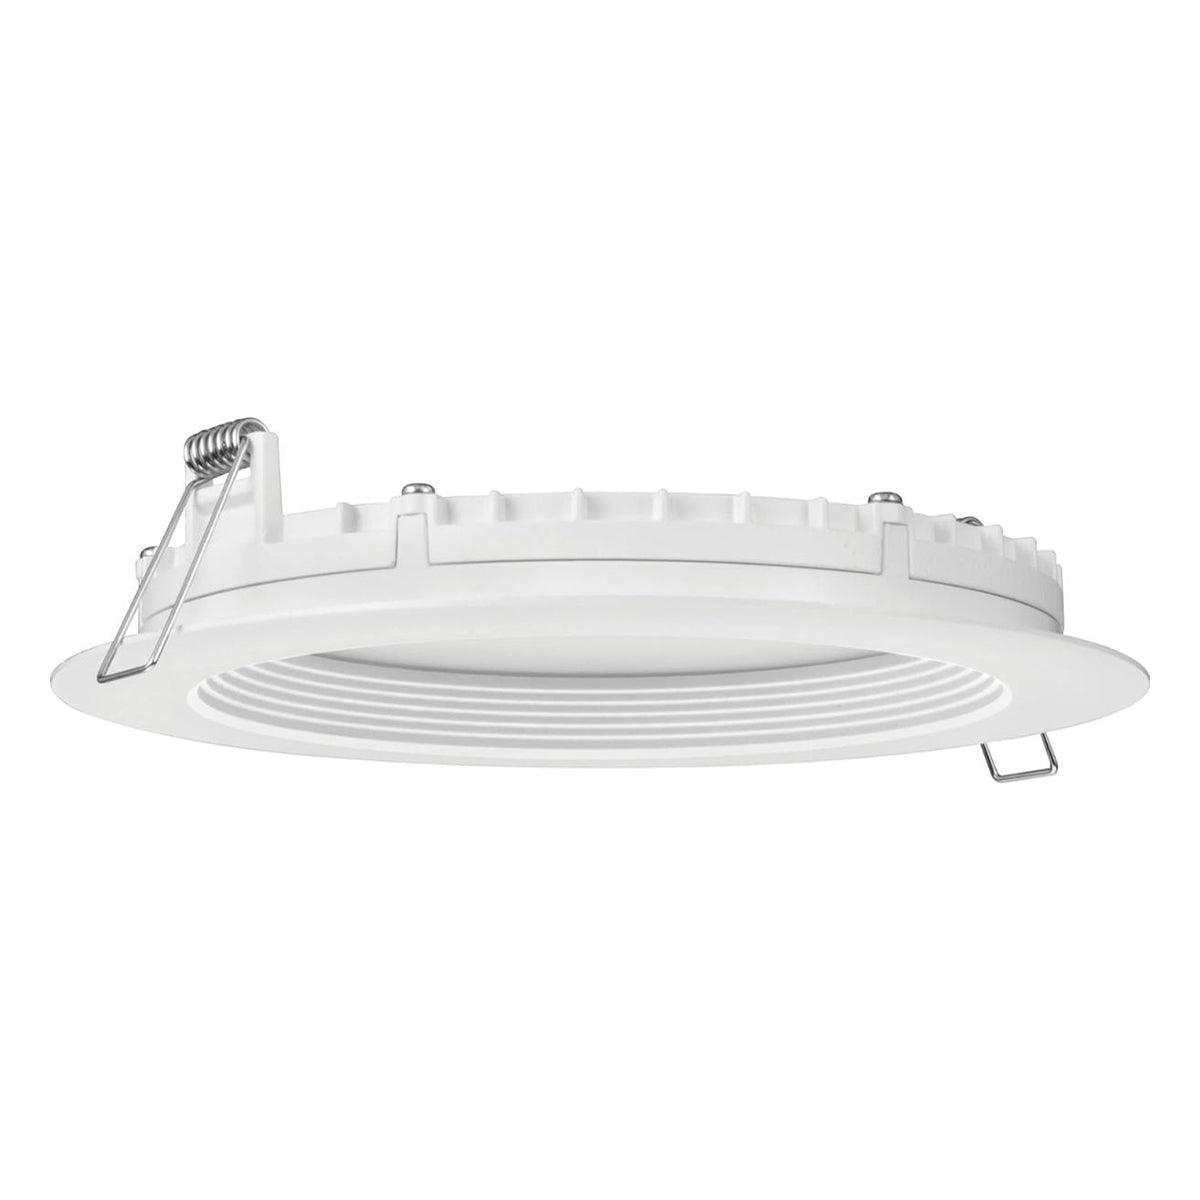 6 In. Wafer Regress LED Recessed Light, 1000 Lumens, Selectable CCT, 2700K to 5000K, White Finish